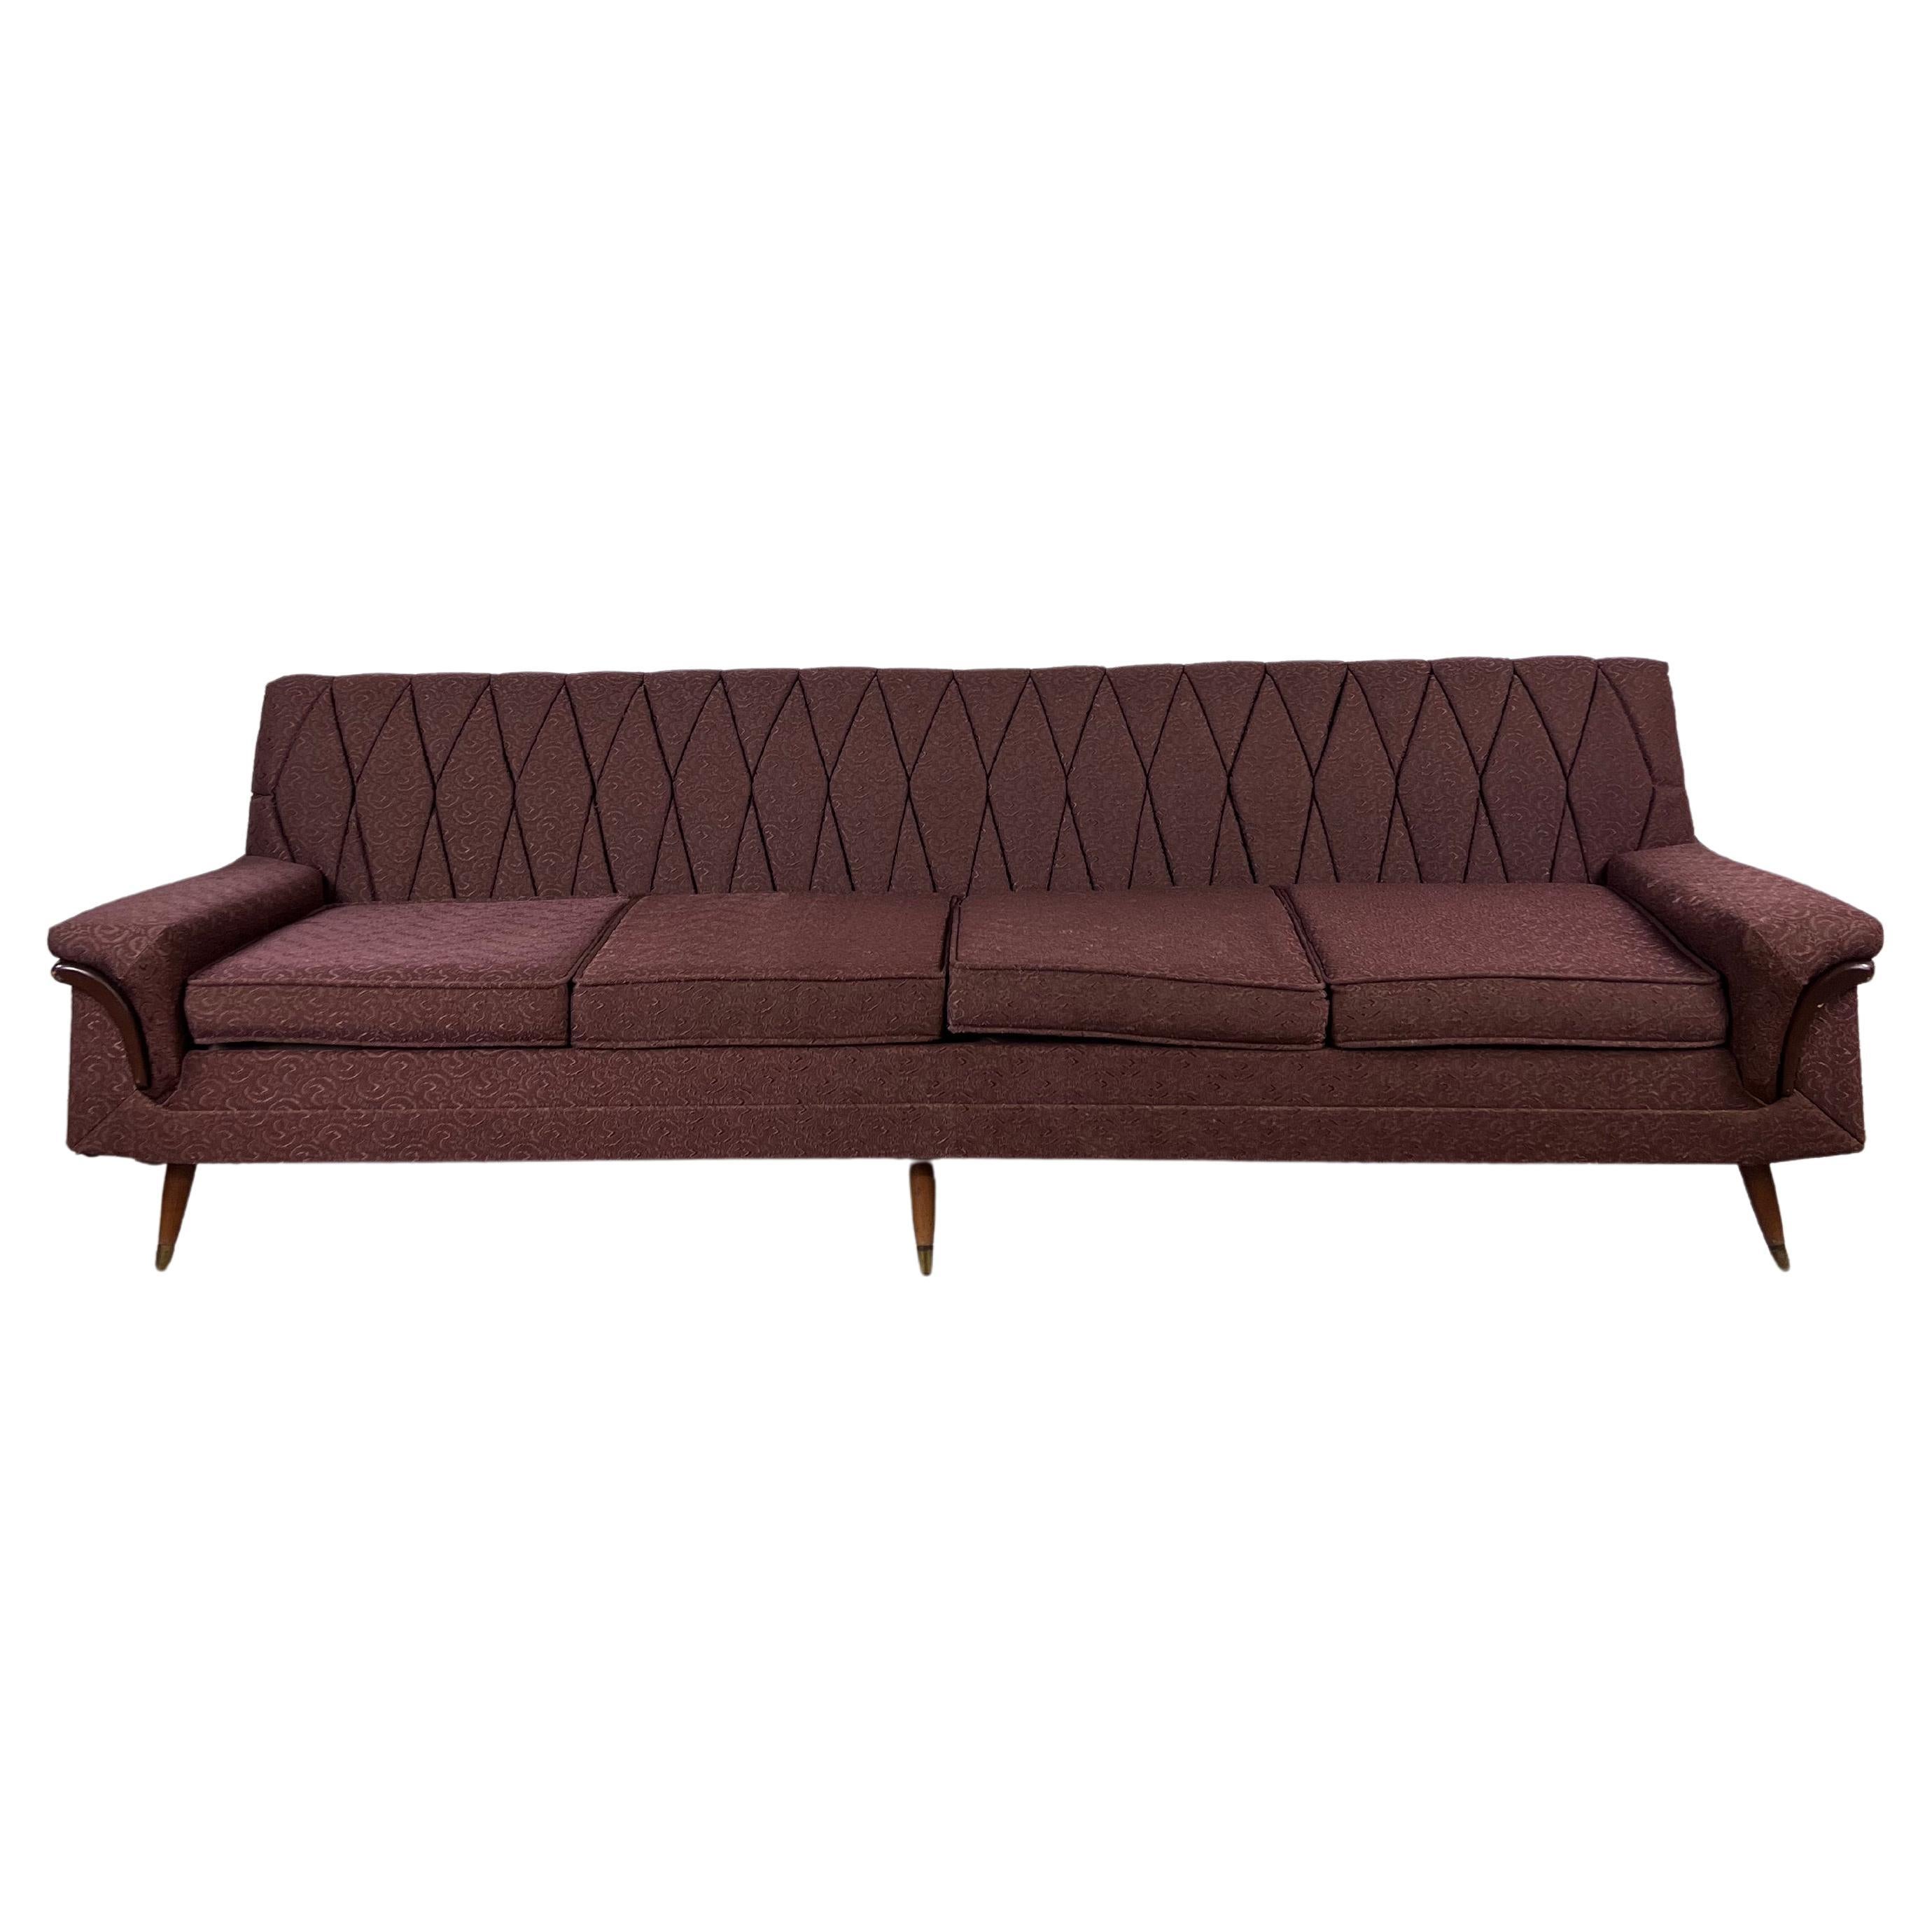 Mid Century Modern Four Seater Sofa with Vintage Upholstery For Sale